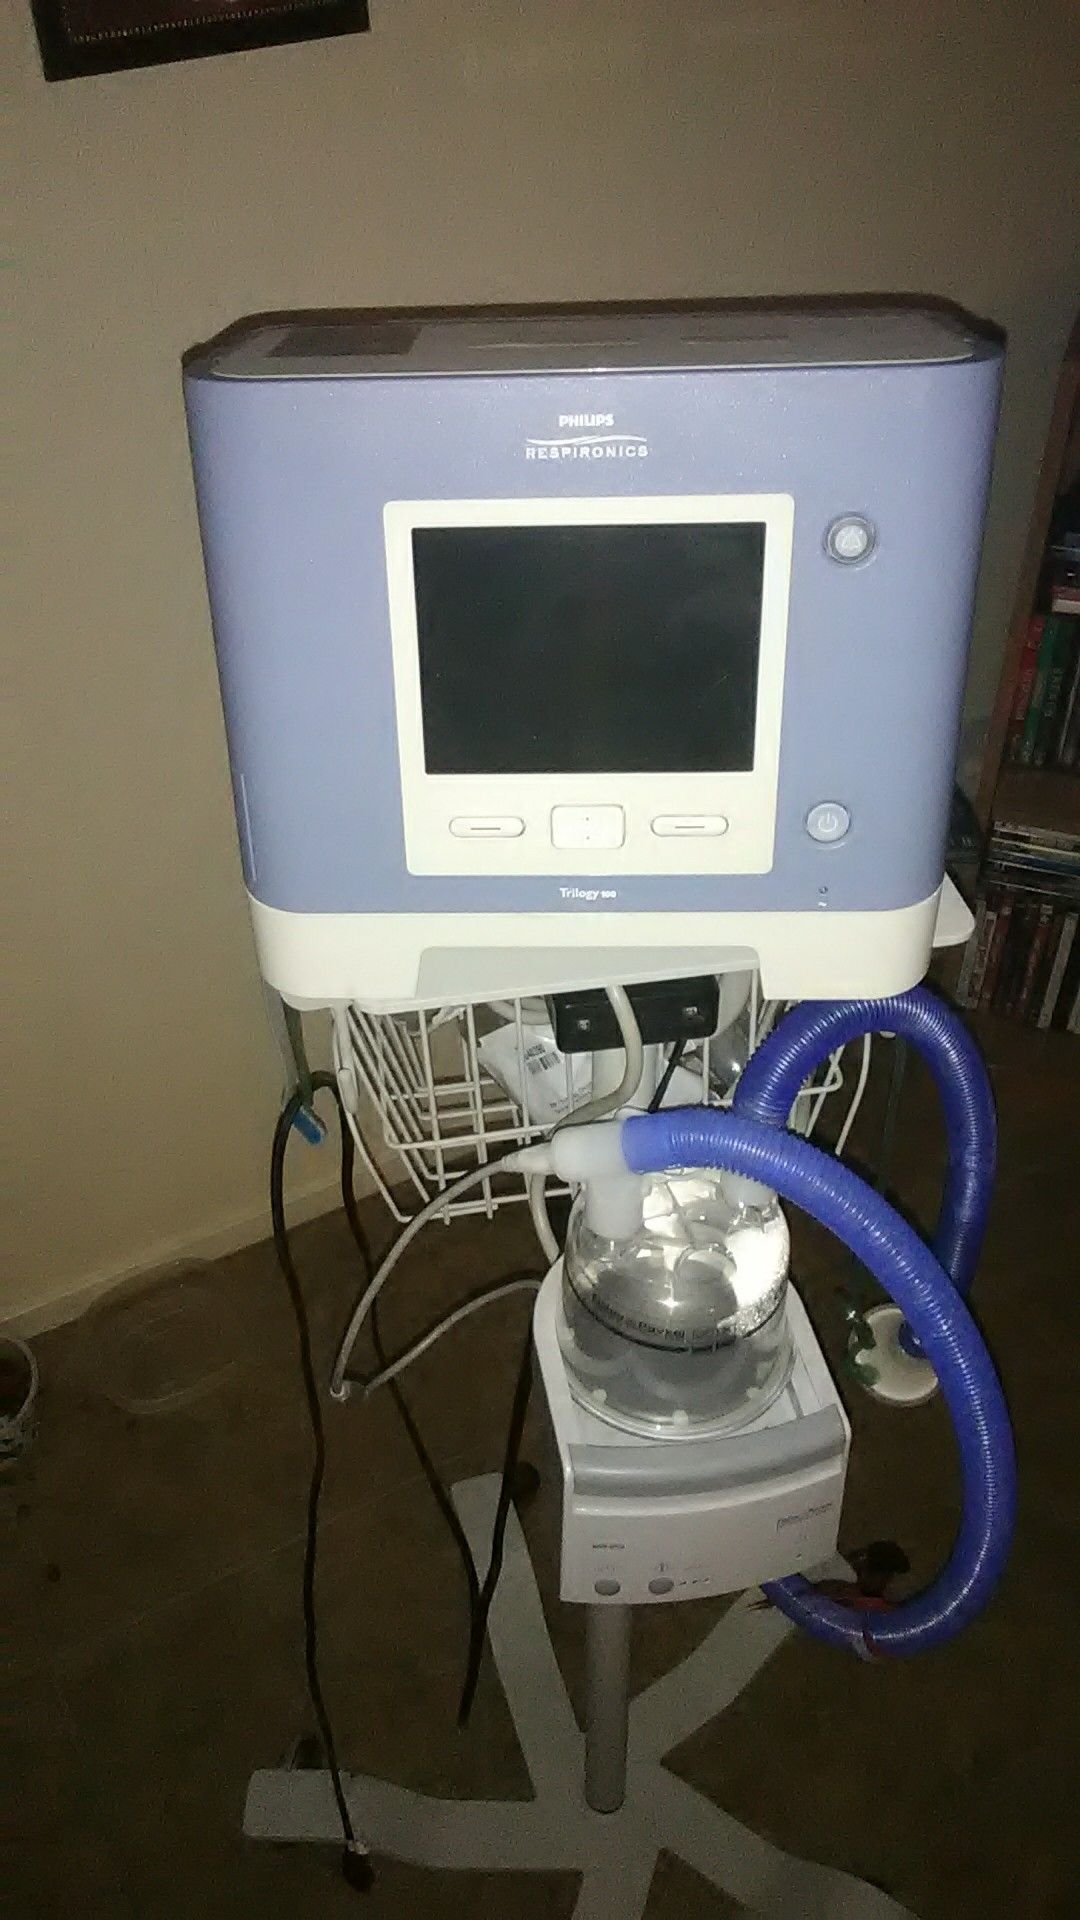 CPAP machine. It's made by Philips respironice